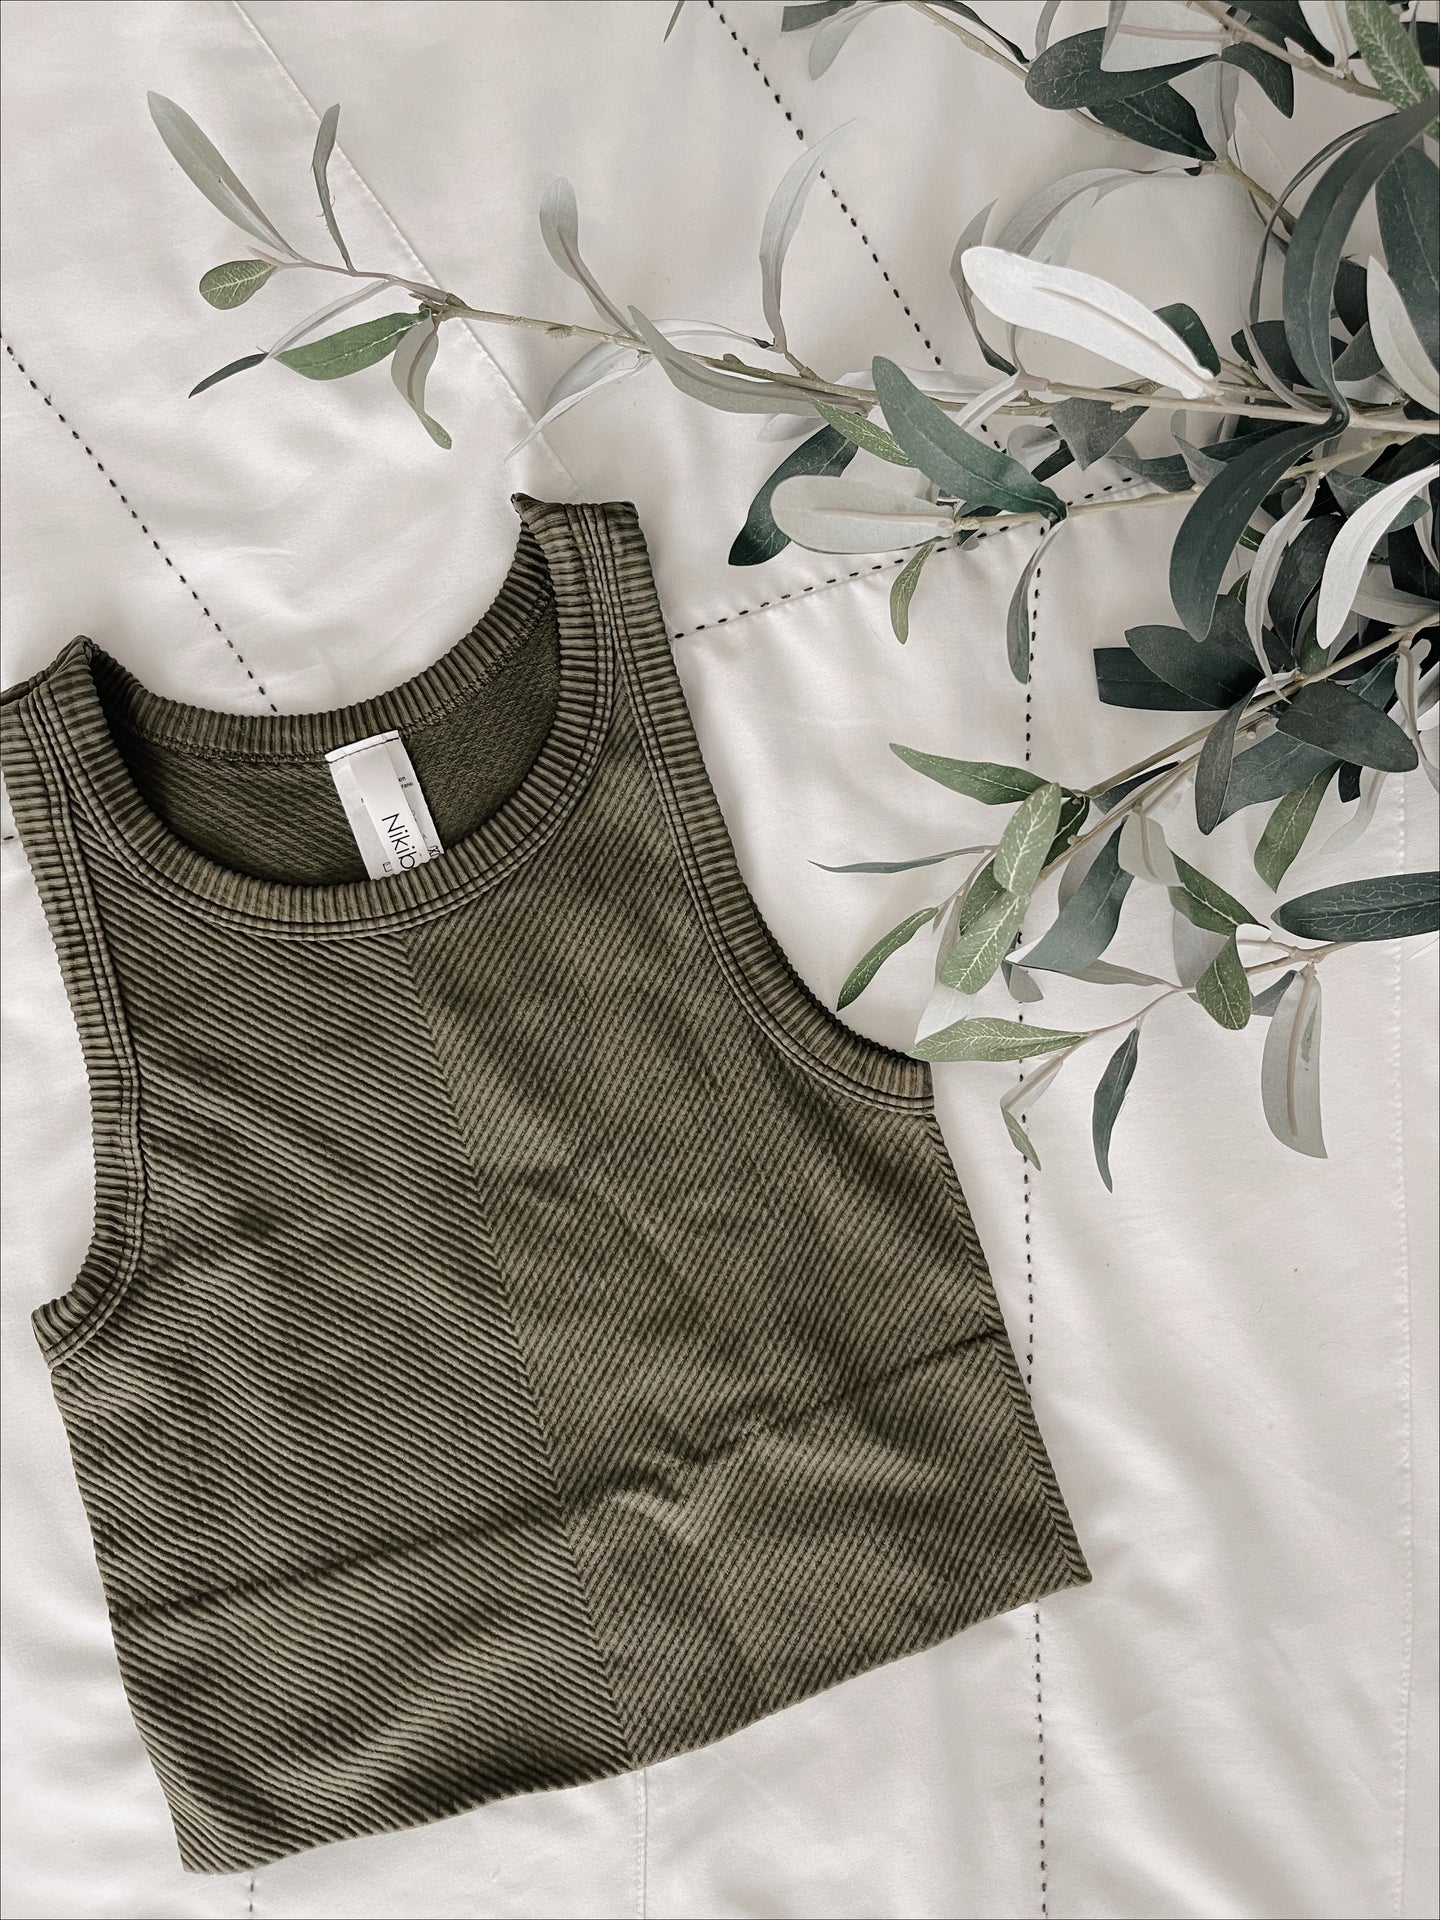 Free To Be Highneck Tank - Vintage Moss